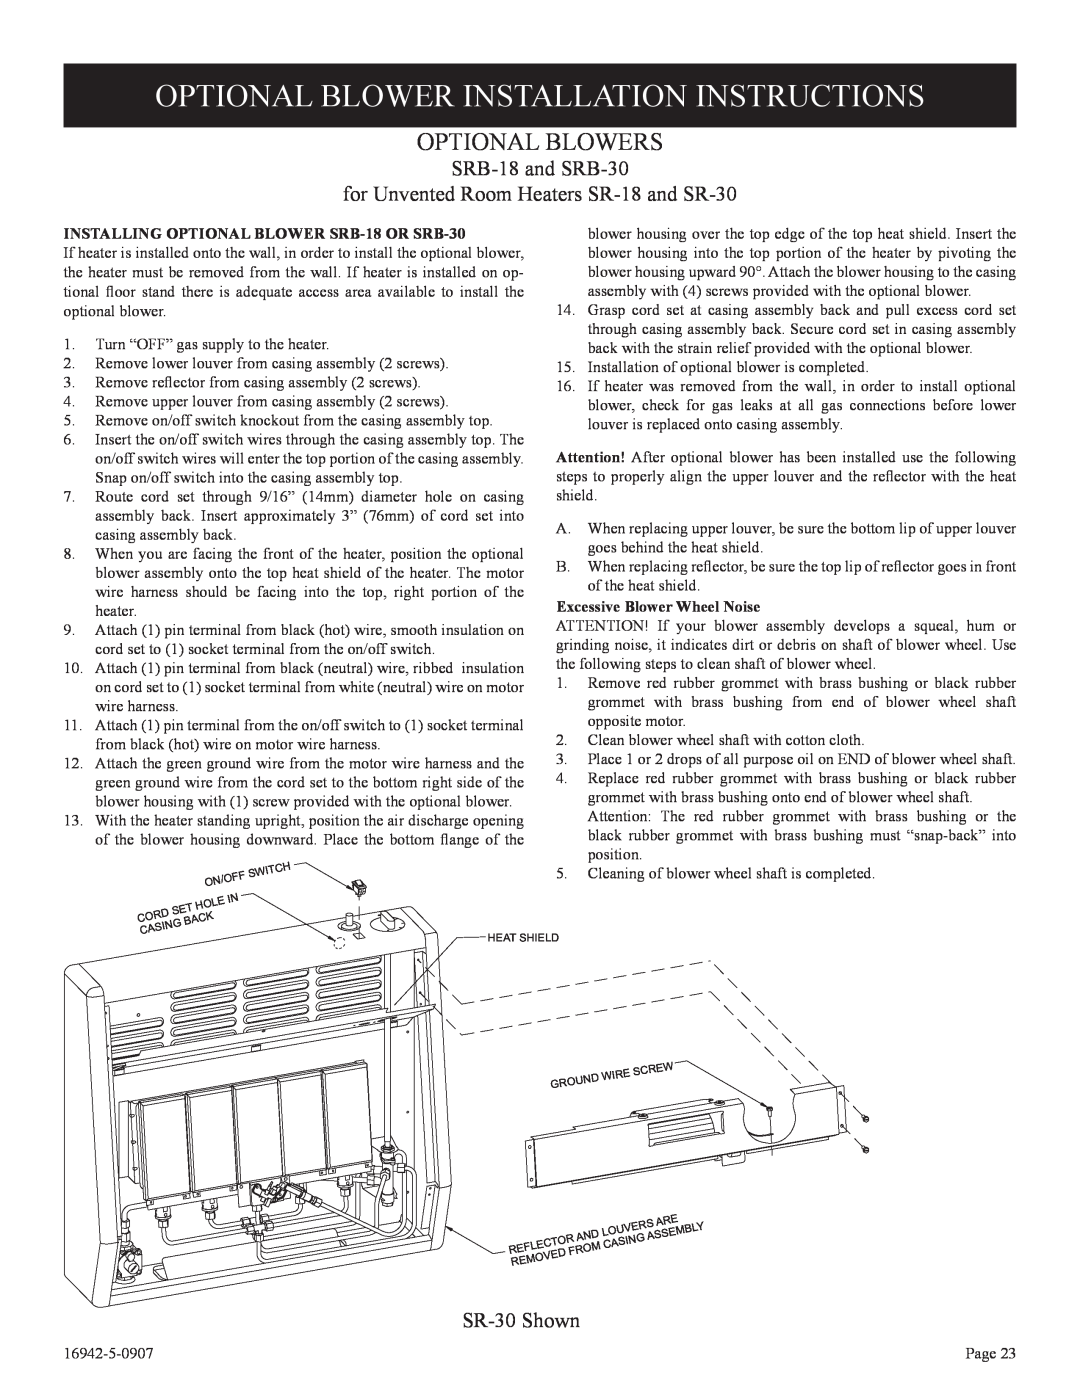 Empire Comfort Systems SR-30 Optional Blower Installation Instructions, Optional Blowers, Excessive Blower Wheel Noise 